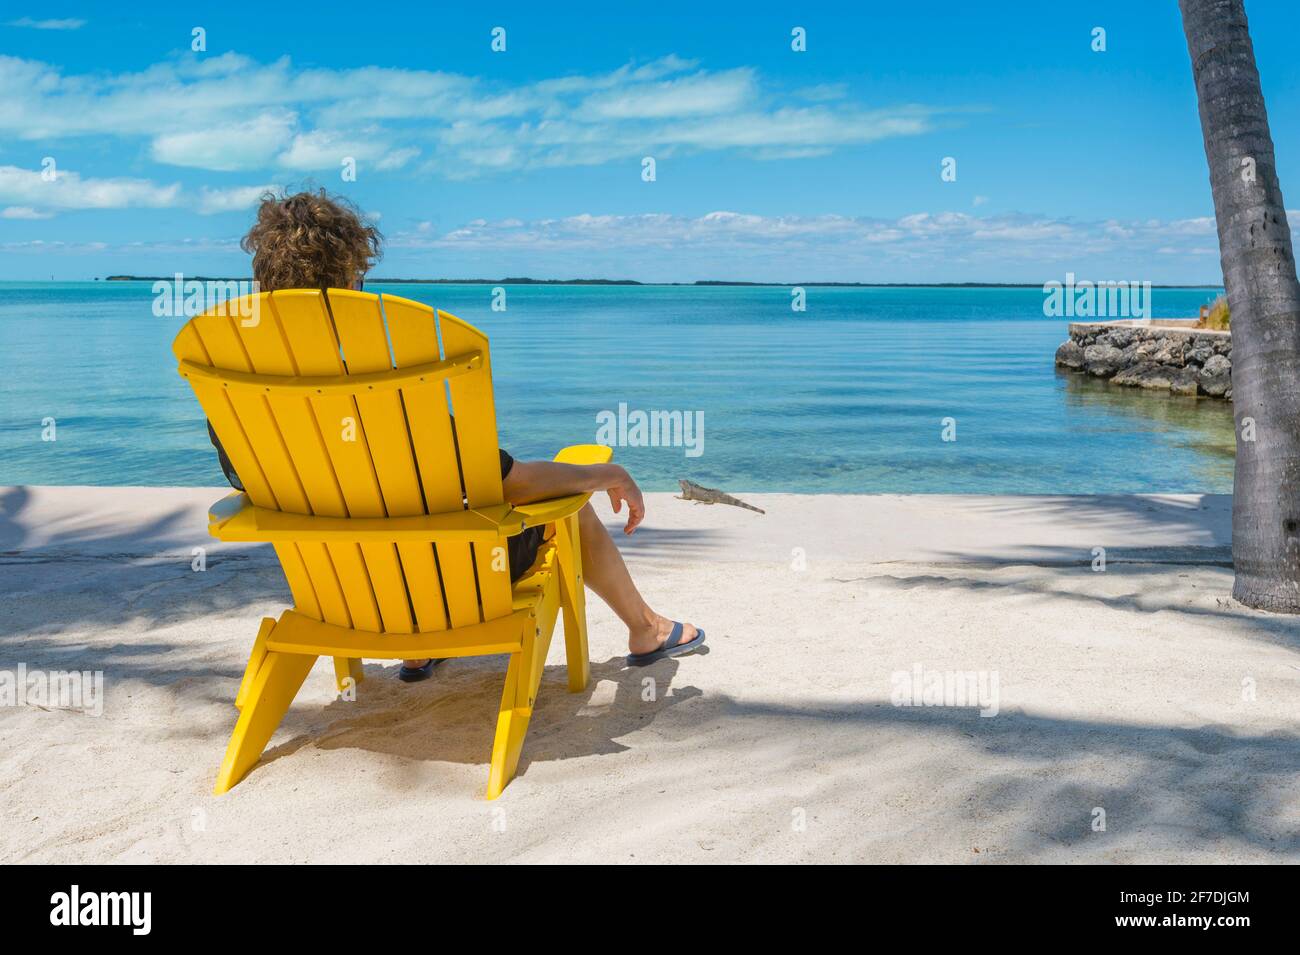 Woman sitting in yellow adirondack chair, staring out contemplatively at Caribbean ocean on incredibly beautiful sunny day. Stock Photo